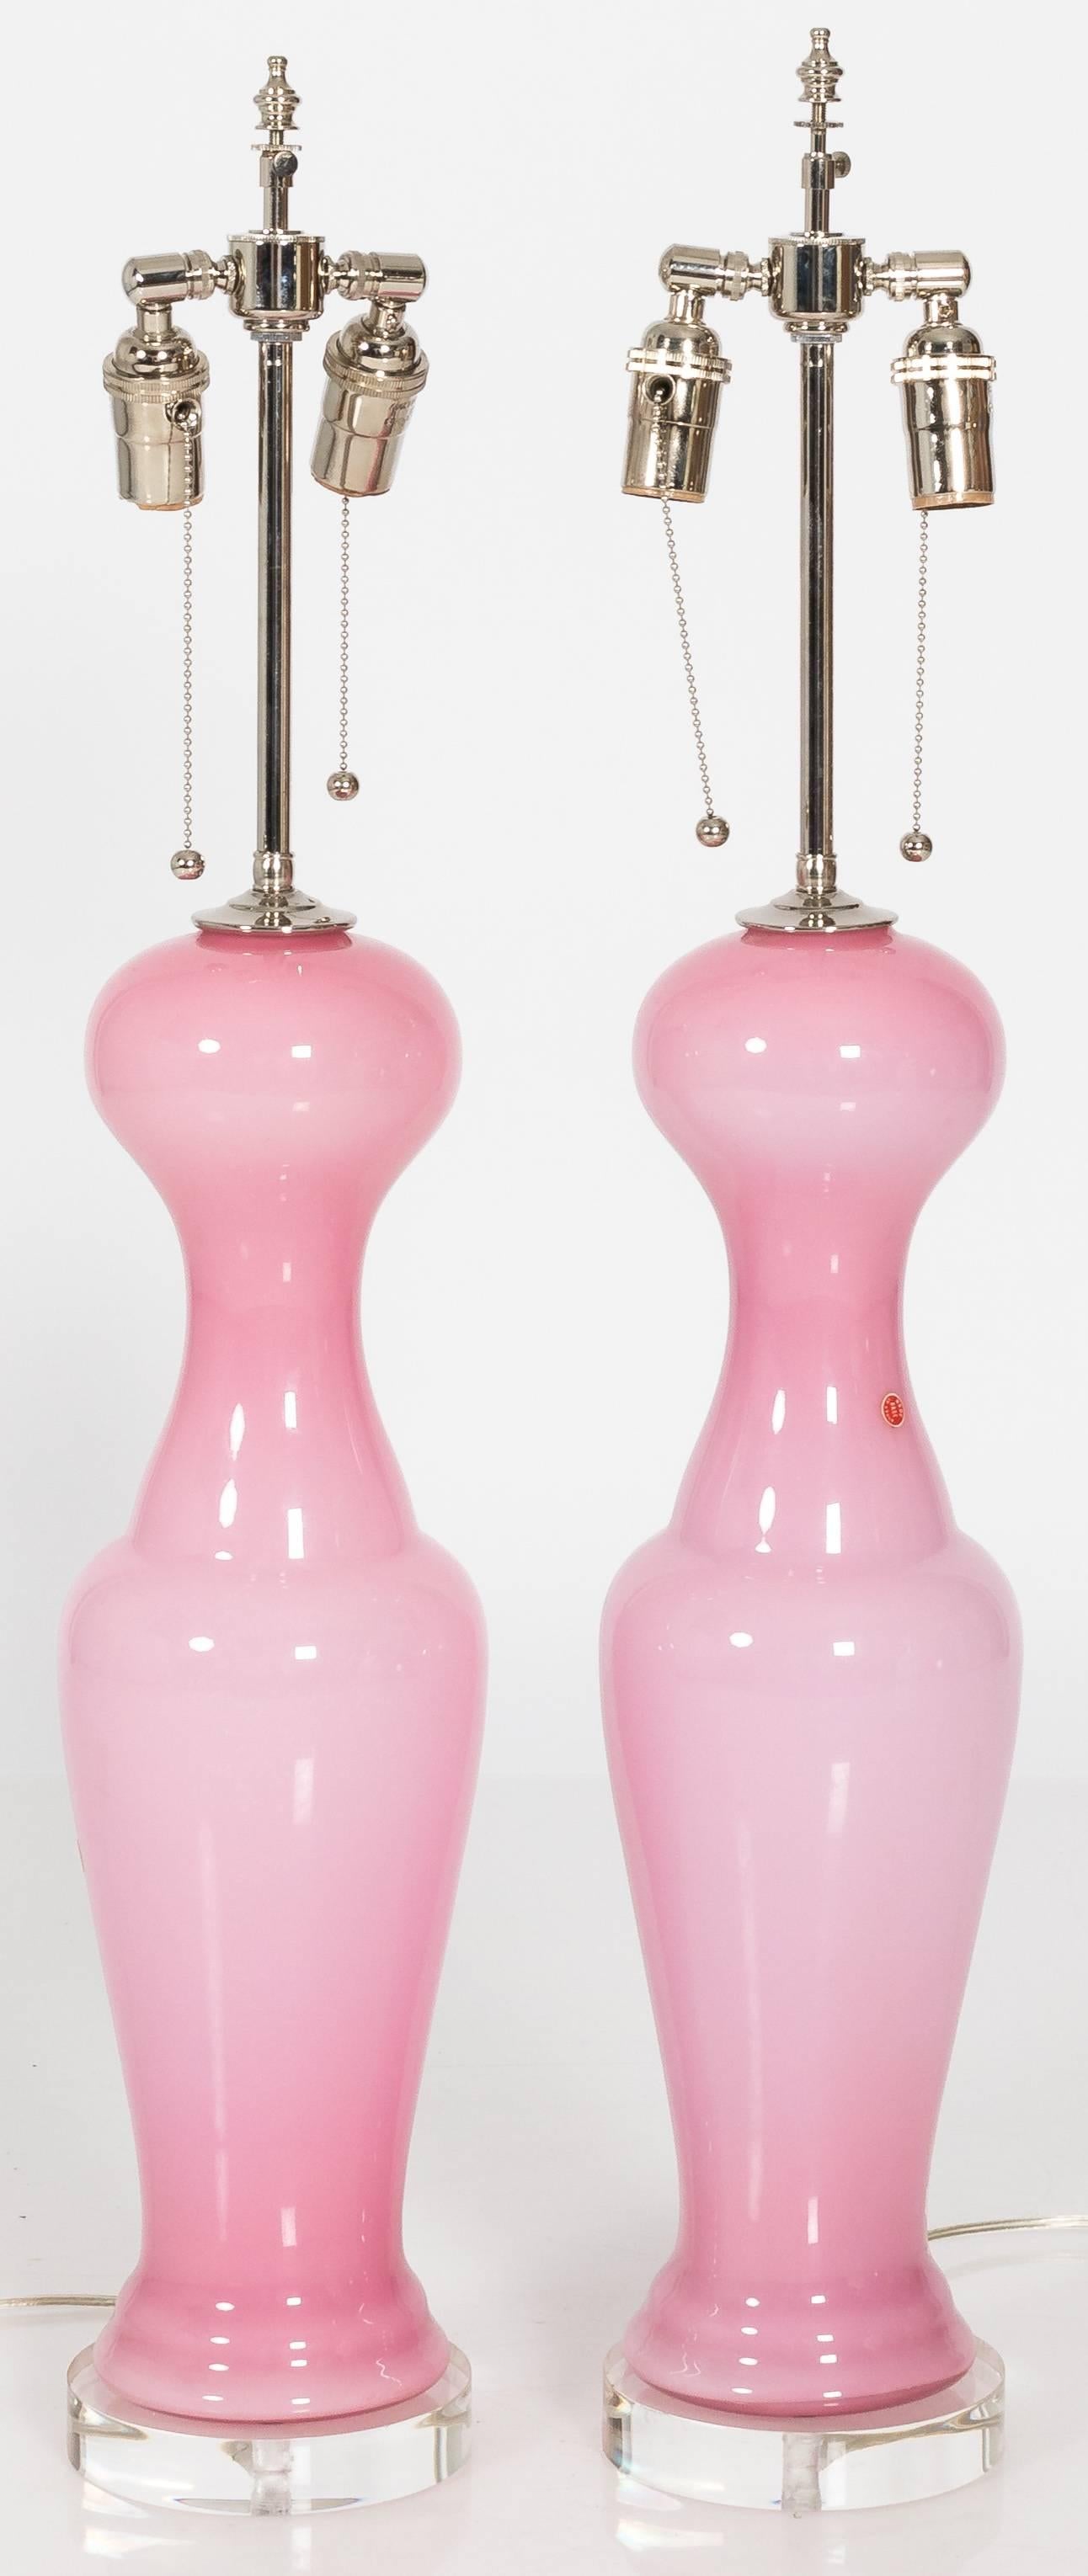 Pair of midcentury curvy light pink Murano glass lamps on new round Lucite bases. Light pink glass that is slightly translucent. Original red Murano stickers on each lamp. Newly rewired and in working condition. Each lamp uses two standard bulbs.